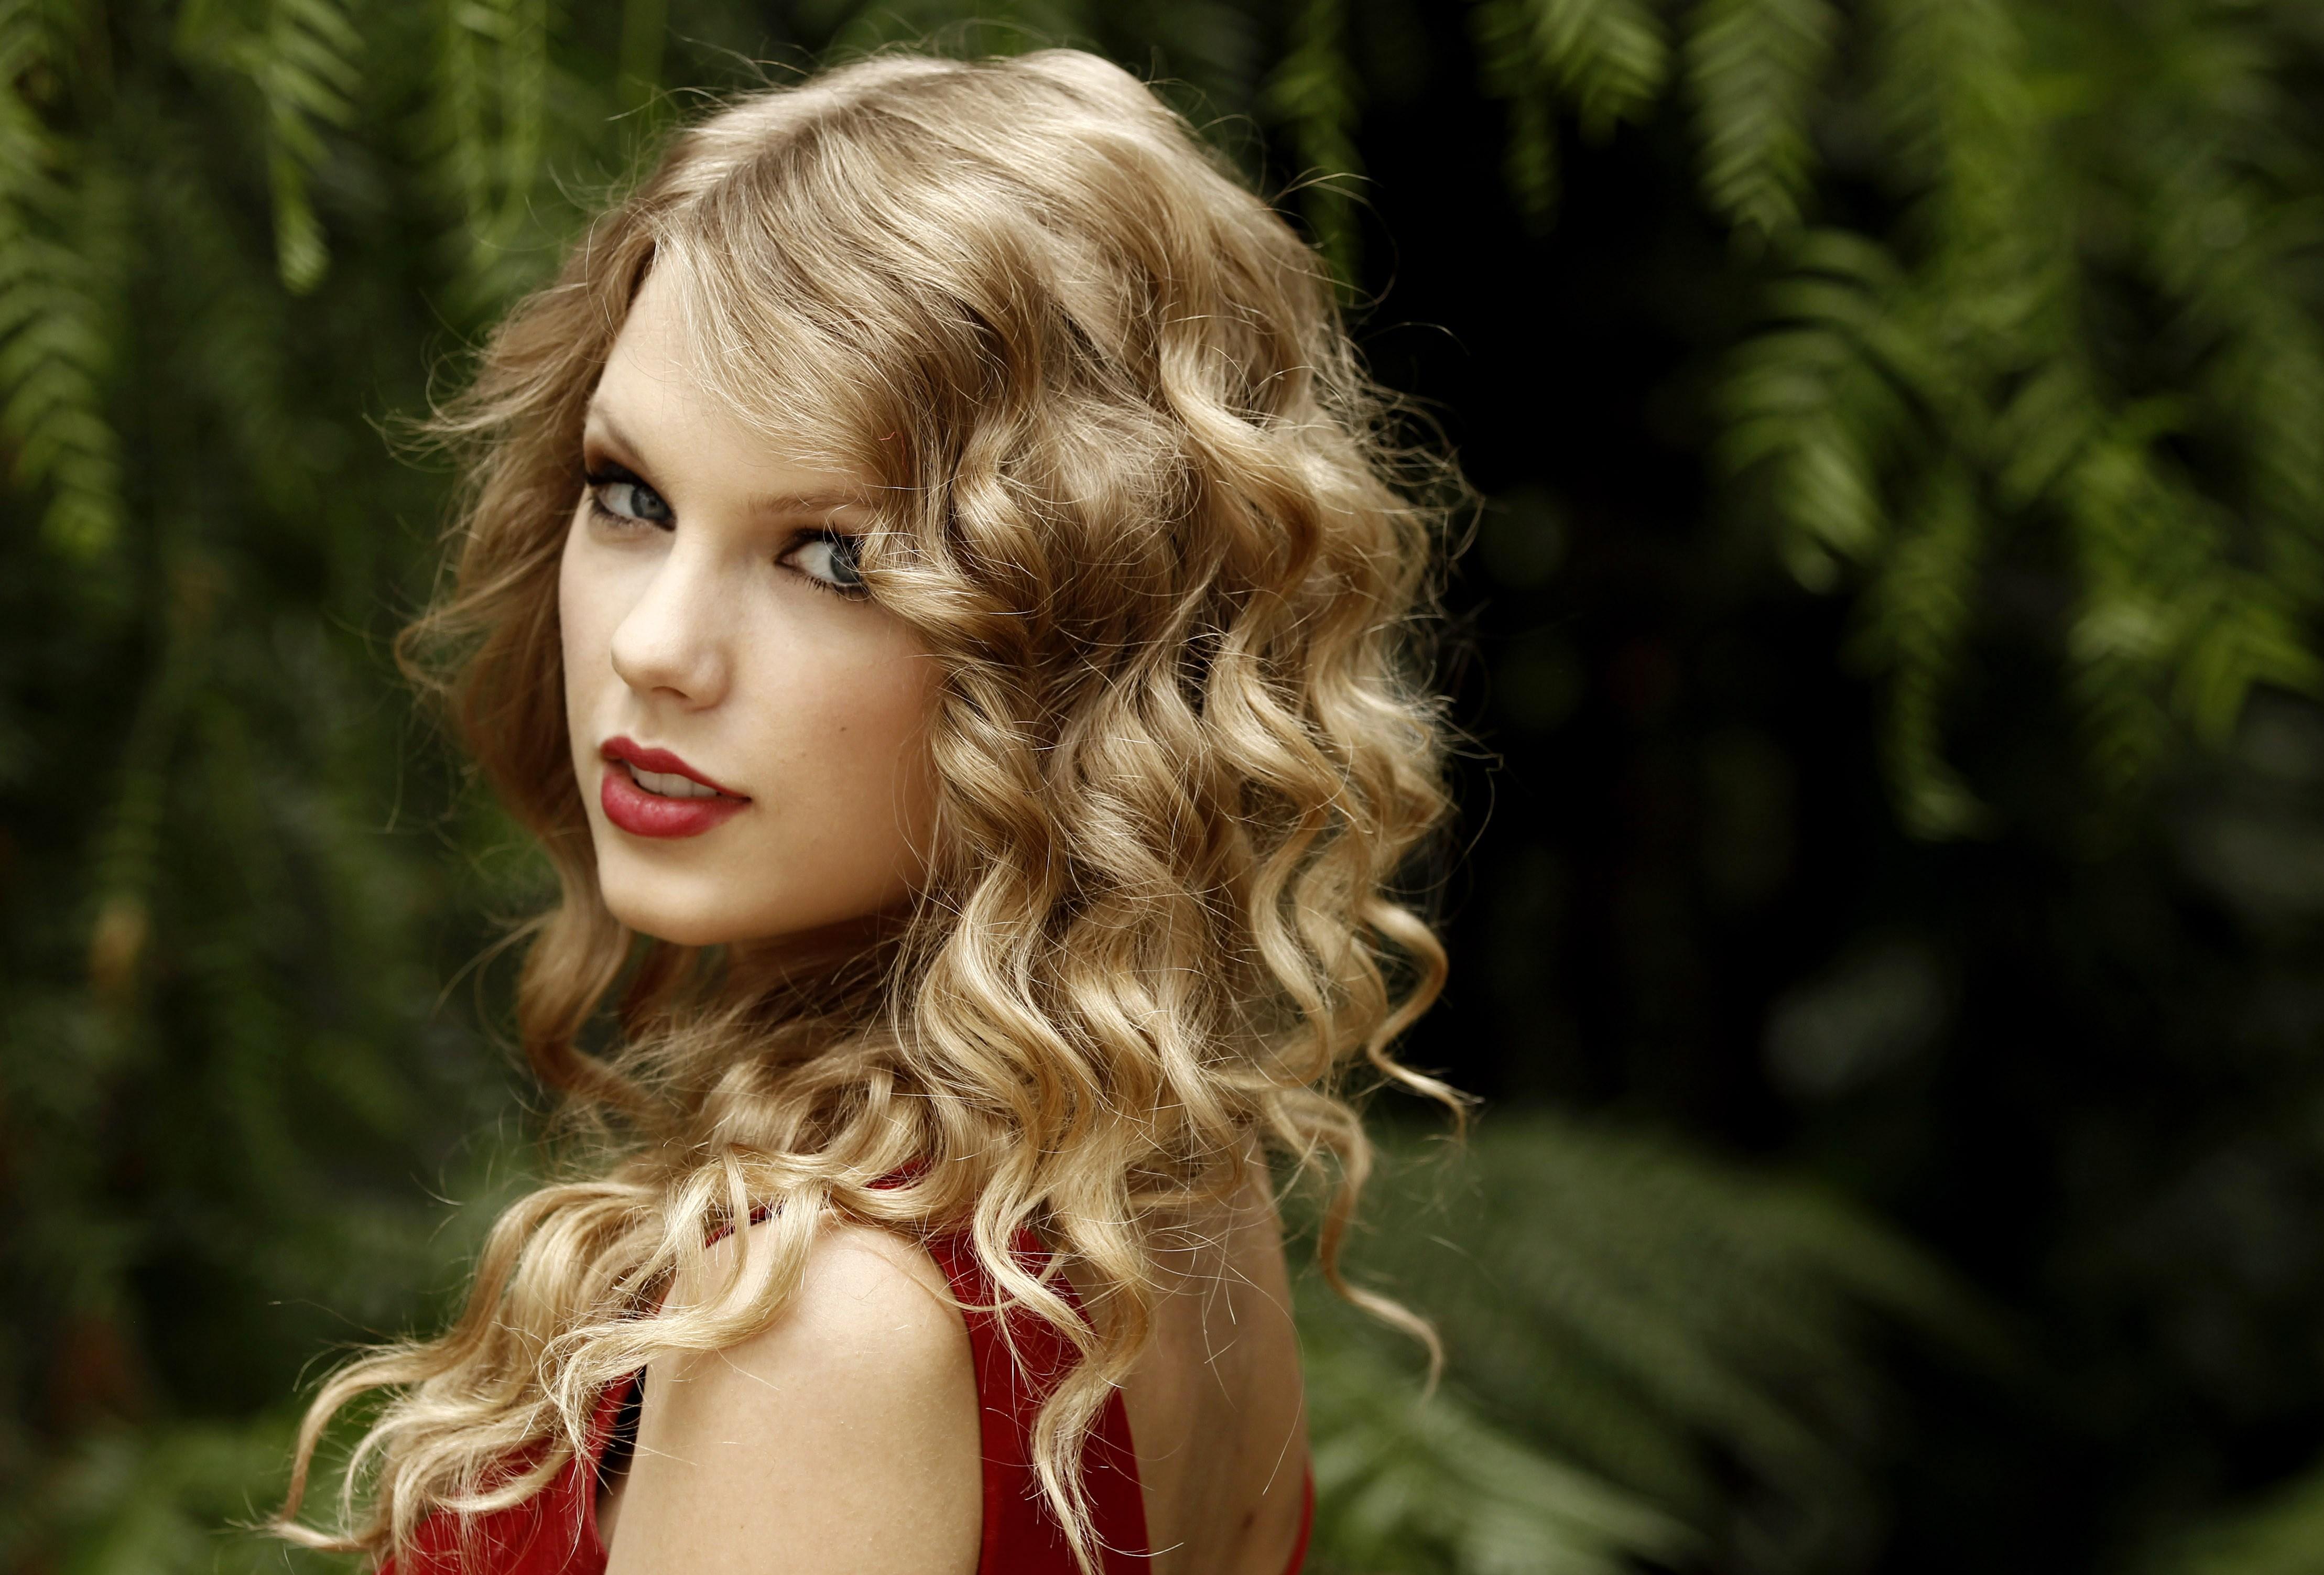  Taylor Swift HD Wallpapers and Backgrounds